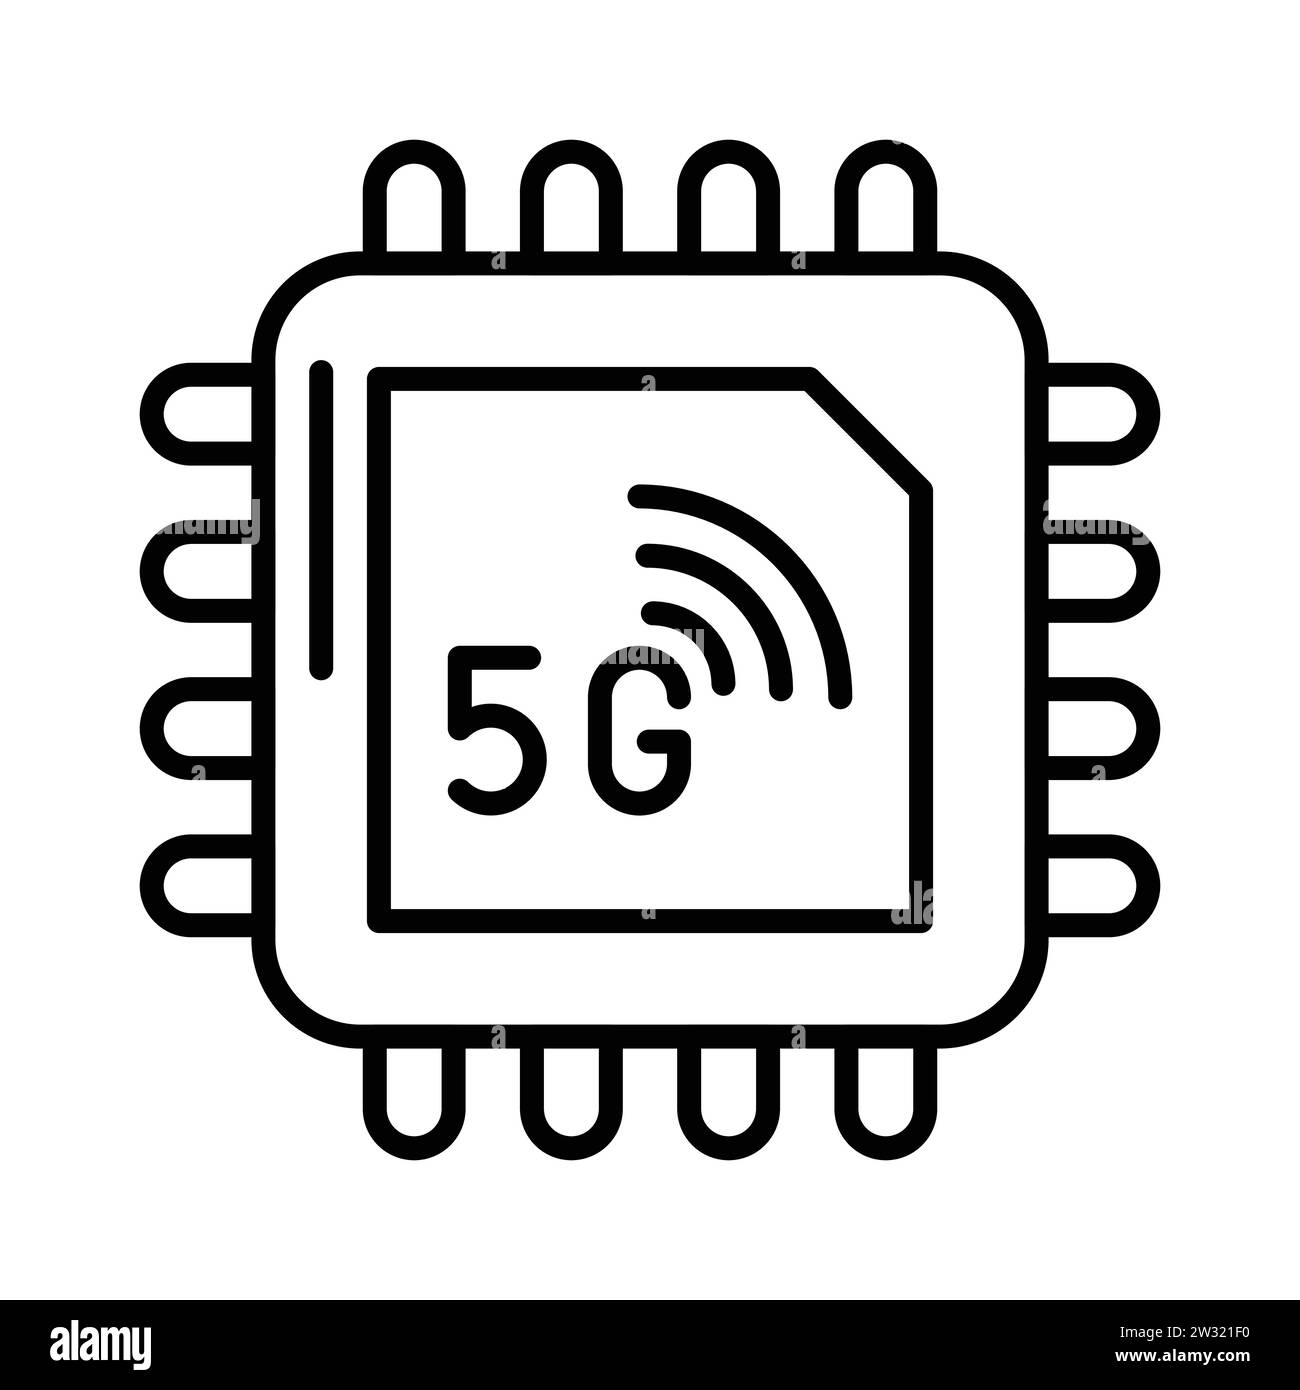 Check this beautifully designed 5G chip icon in Modern Style, 5G technology vector Stock Vector